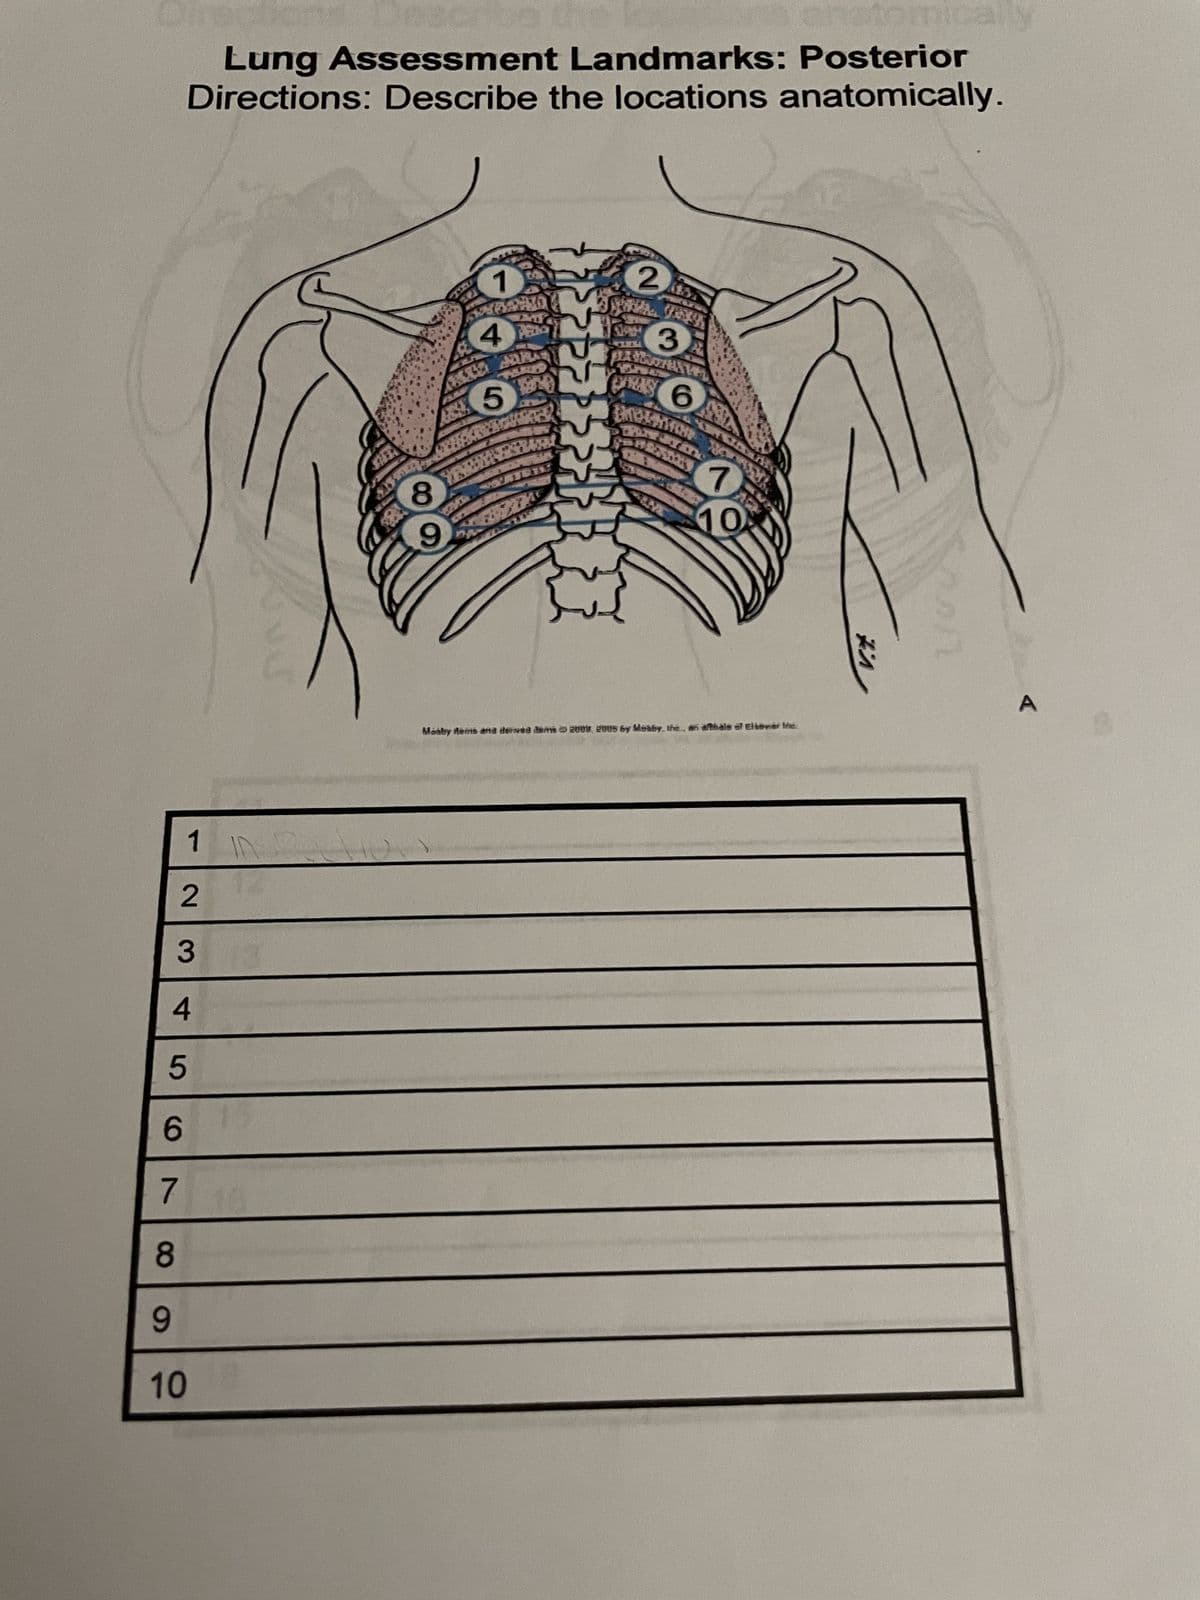 Lung Assessment Landmarks: Posterior
Directions: Describe the locations anatomically.
1
2
3
4
6
5
7
8
9
10
8
9
1
4
5
2
3
6
100
7
10
pmically
Moaby items ana dermed dem 2009, 2005 6y Mosby, the, an afhale of Elsever the
1